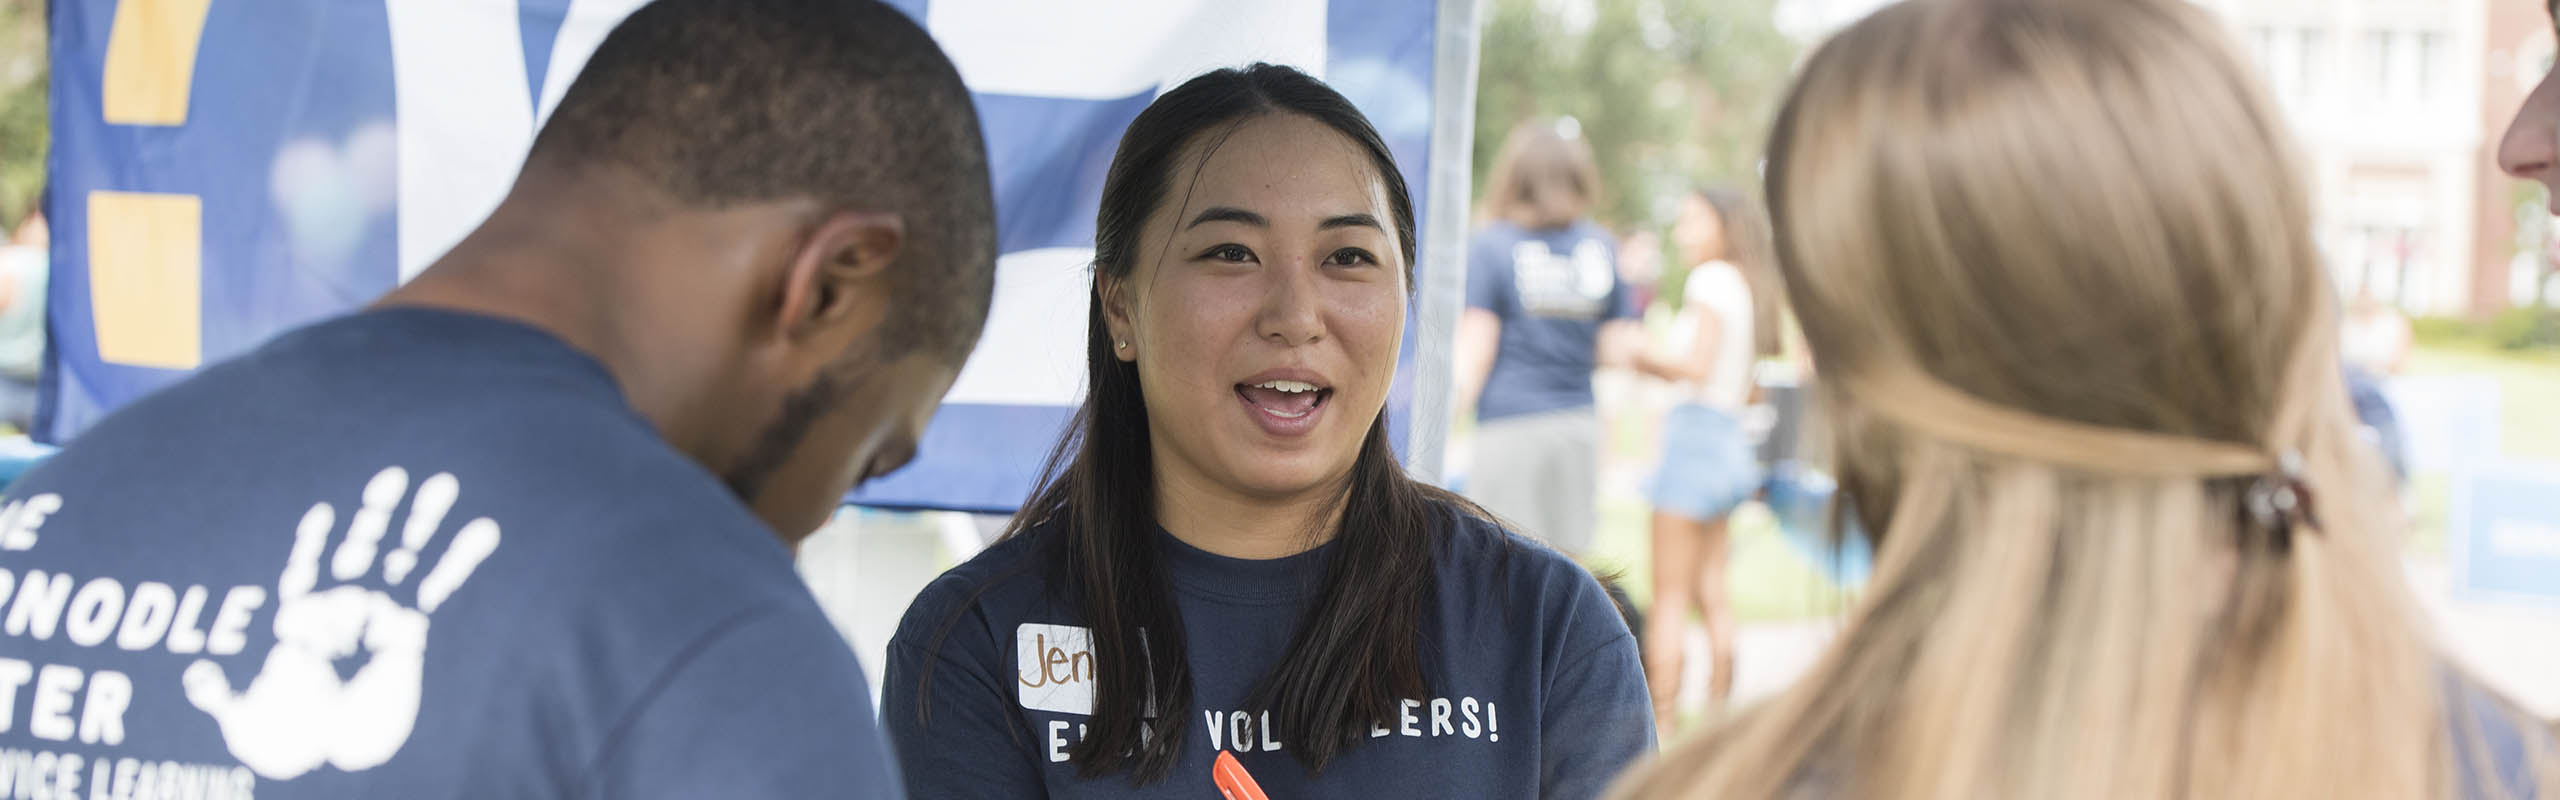 Human service studies major Jenny Fukunaga '17, the Executive Director of Leadership and Development for Elon Volunteers, manages the students working for Elon Volunteers at the Org Fair.